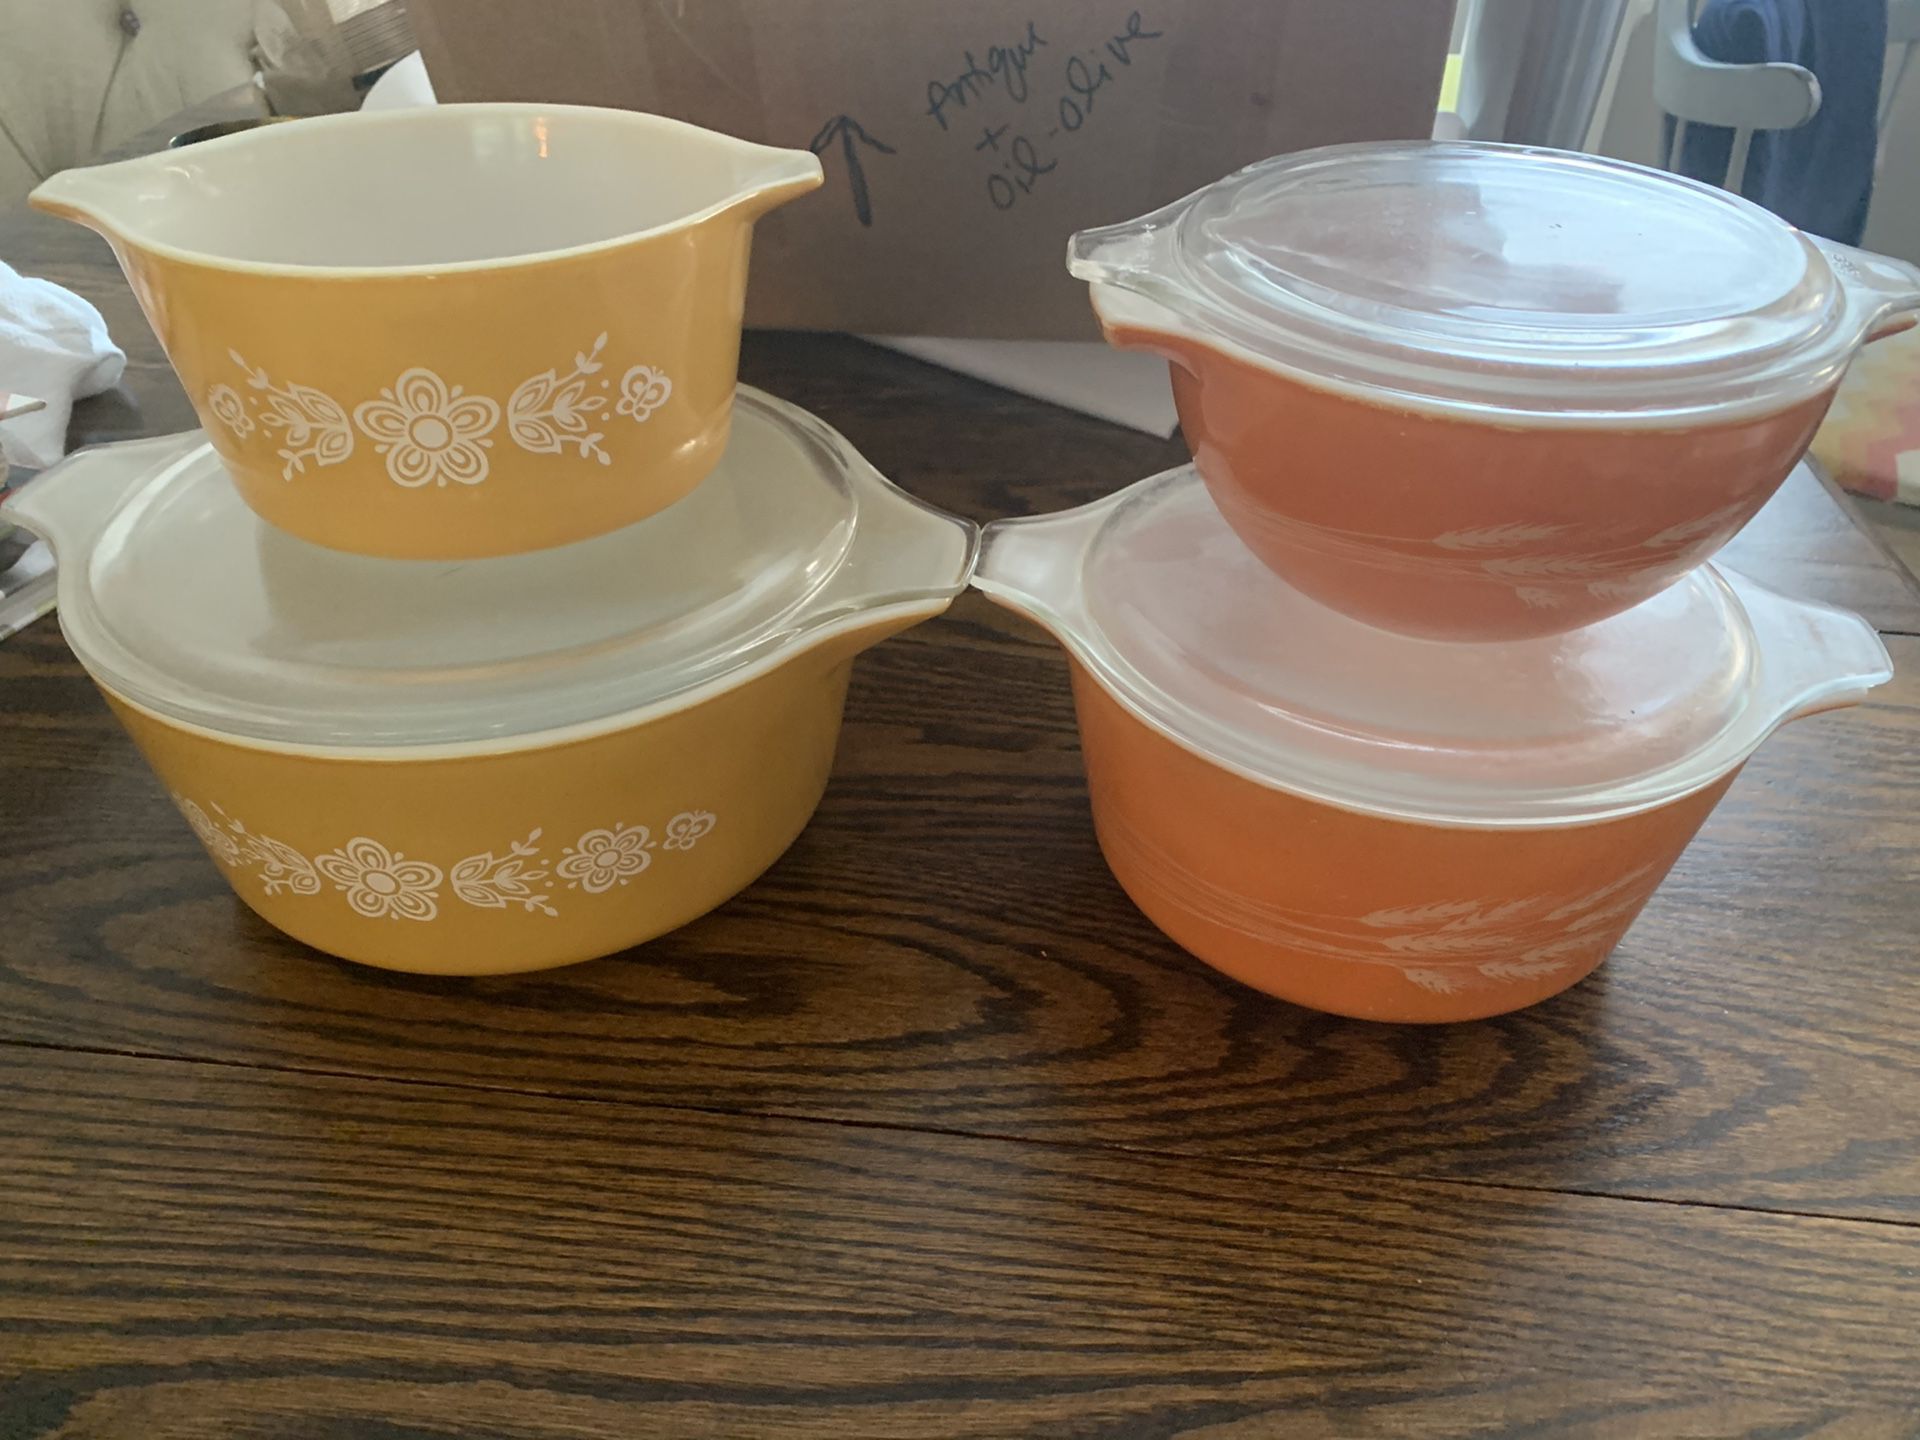 Pyrex bowls (4) - missing one lid